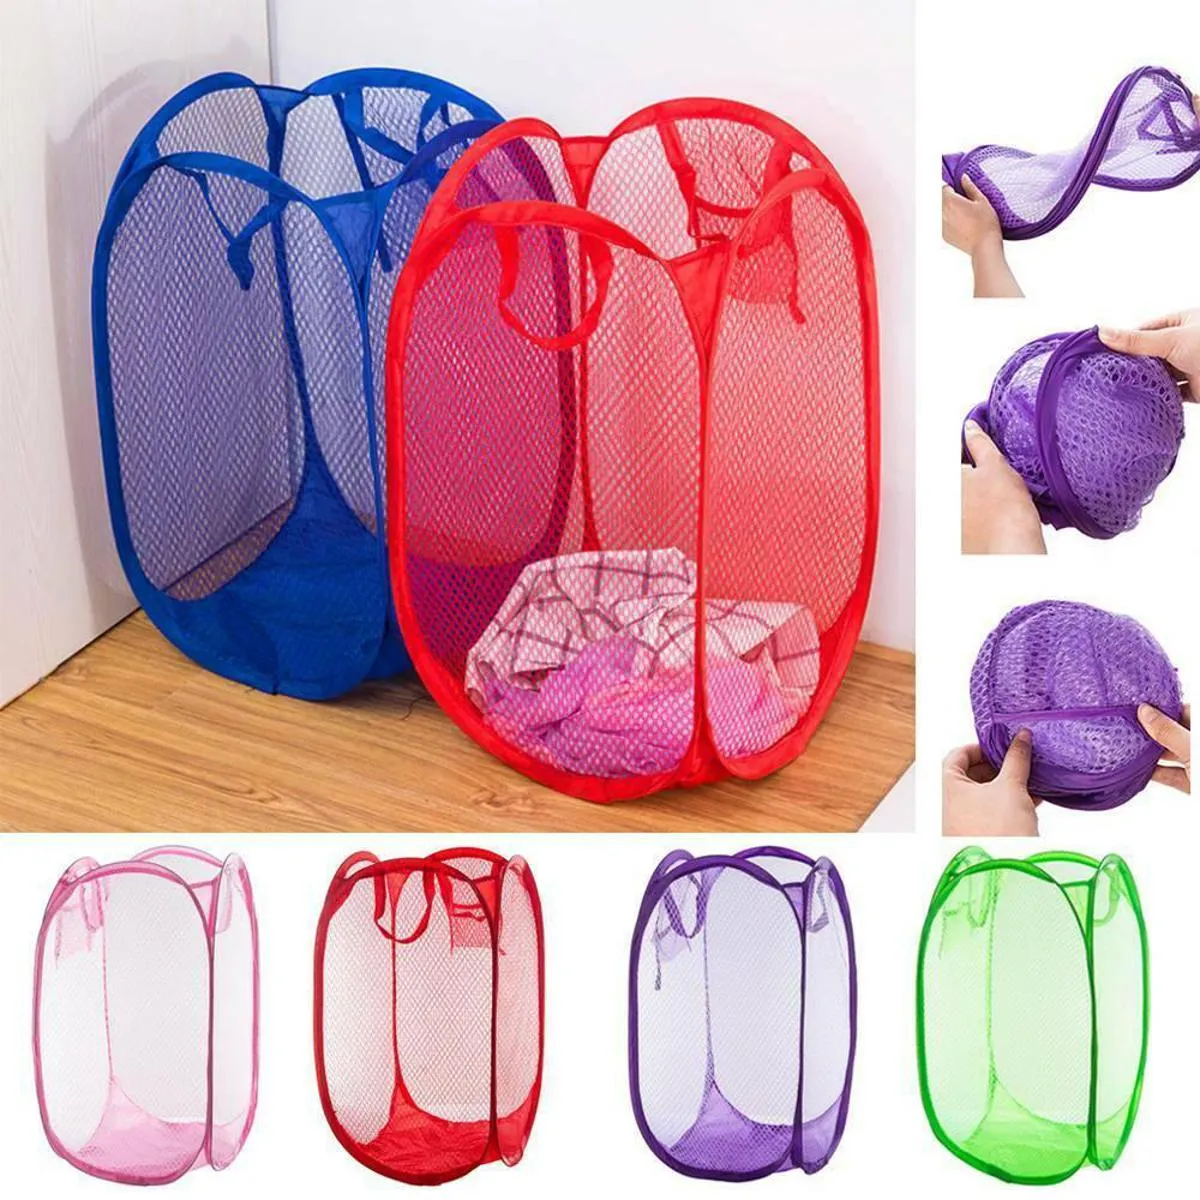 Pack of Two Foldable Net Laundry Basket Price in Pakistan